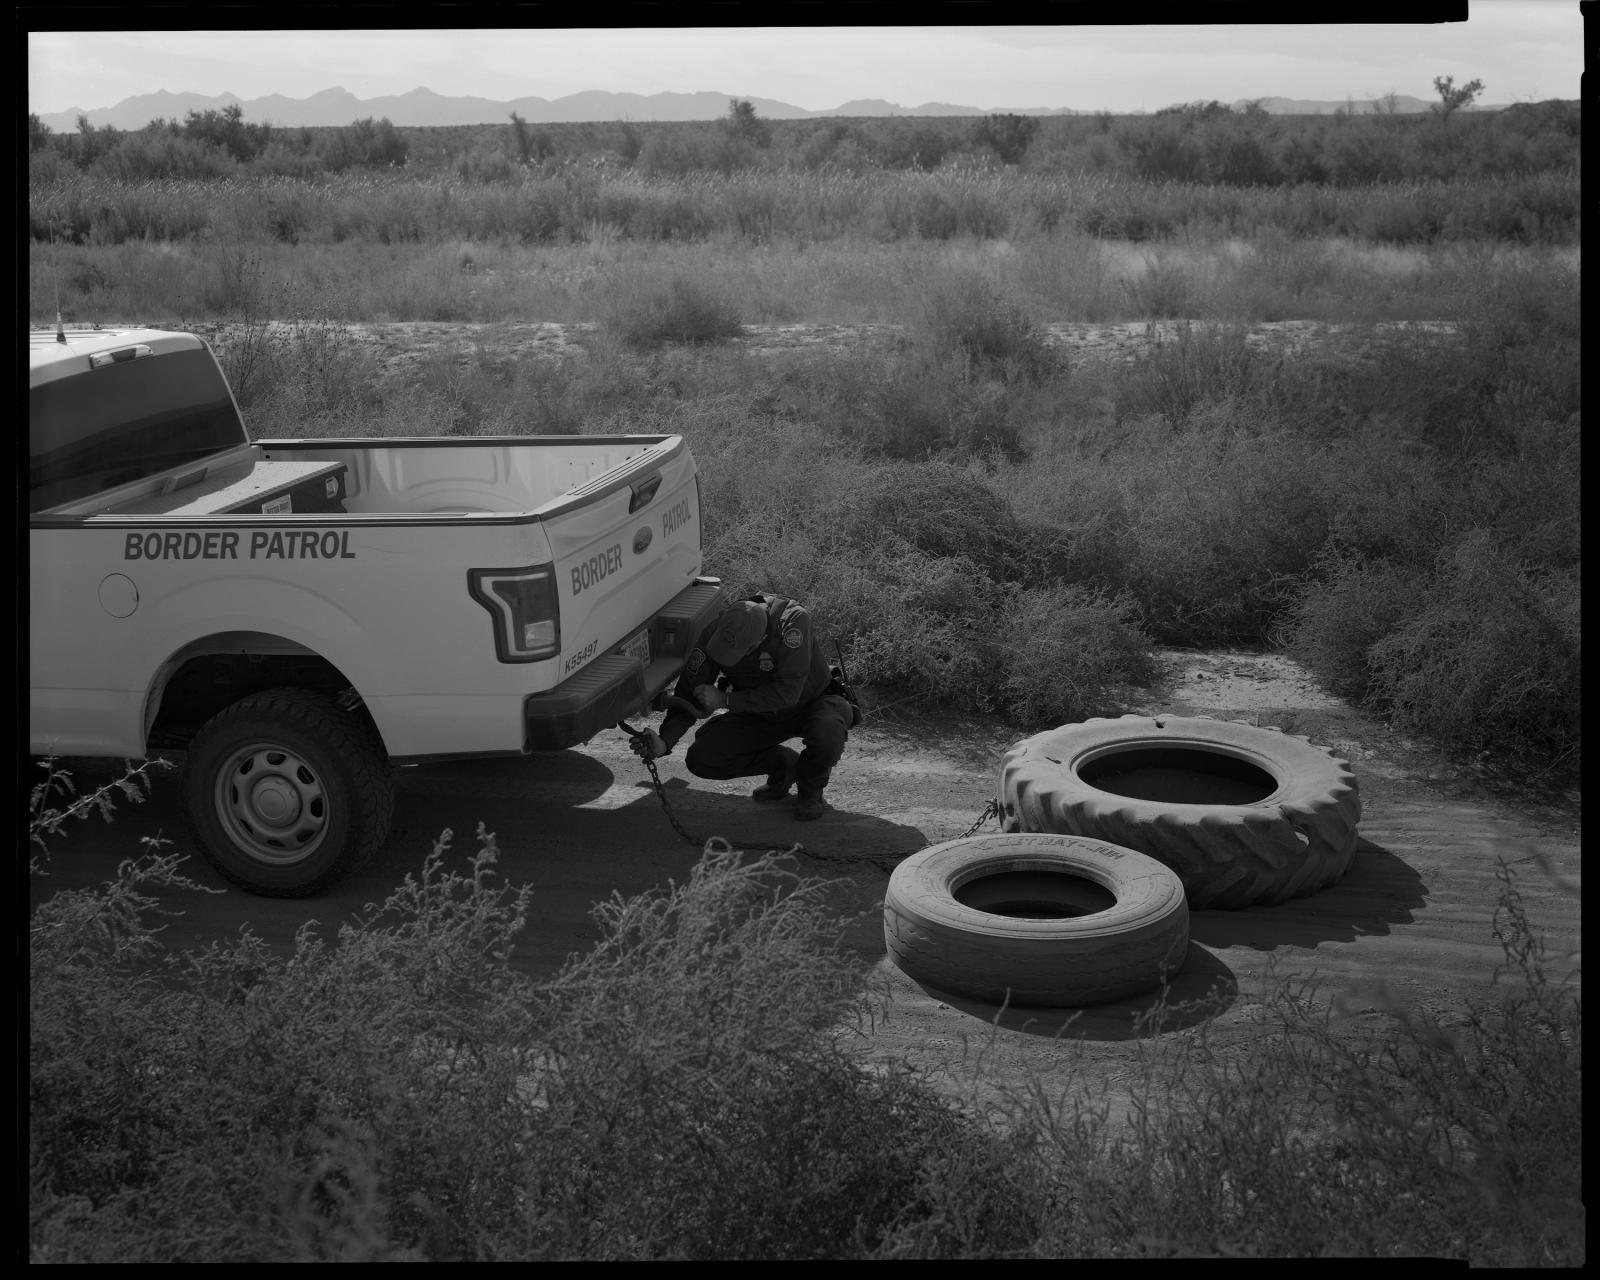 Border Patrol, setting up to drag tires, West Texas, December 2020